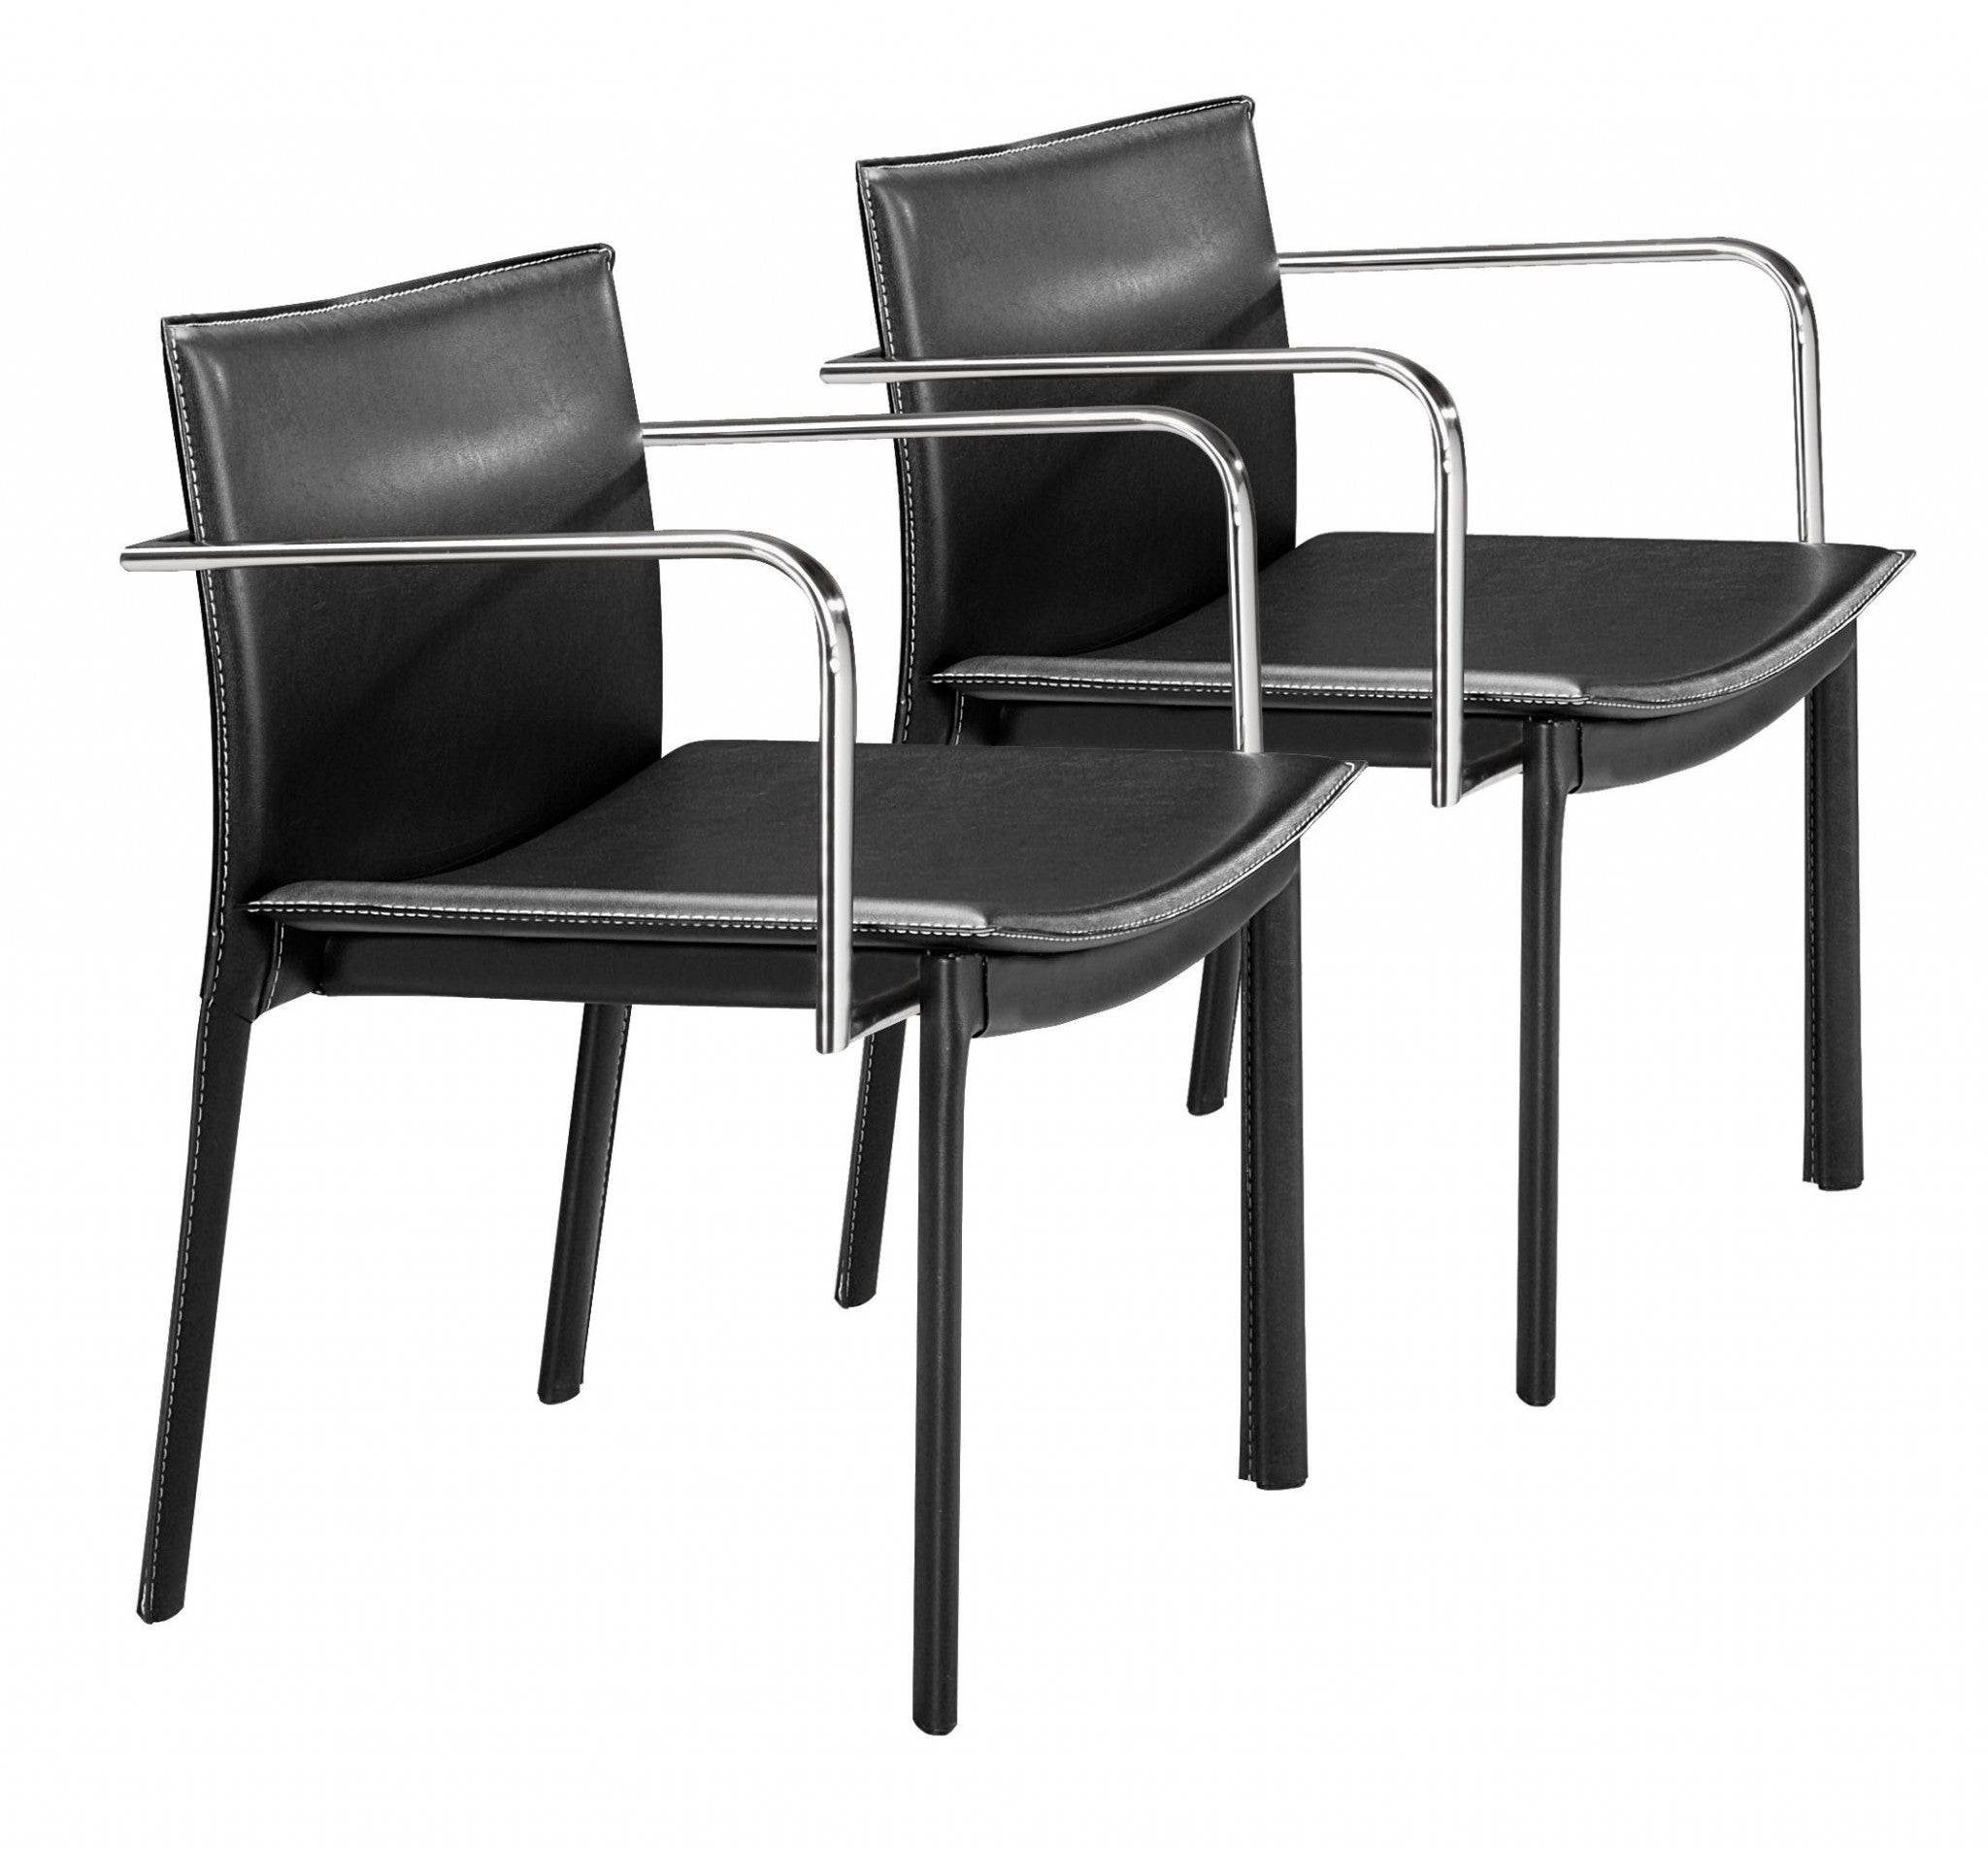 Set of Two Chrome Black Faux Leather Armchairs